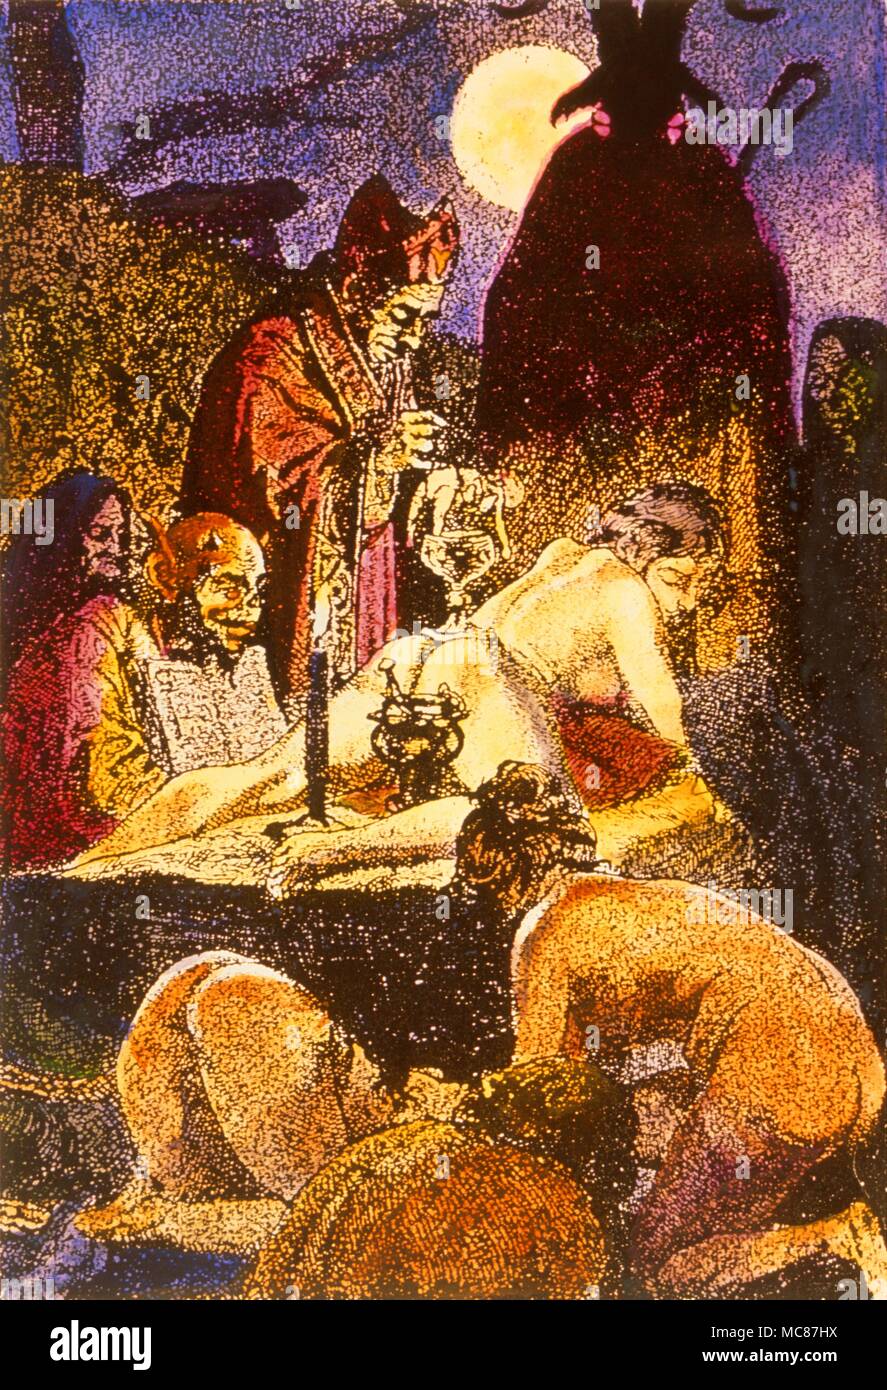 Colour engrqving of a highly romantic view of the Black Mass [which technically requires a priest to officiate]. The Black Mass is supposed to require the use of a virgin as an altar. In the background is the horned Devil. Stock Photo